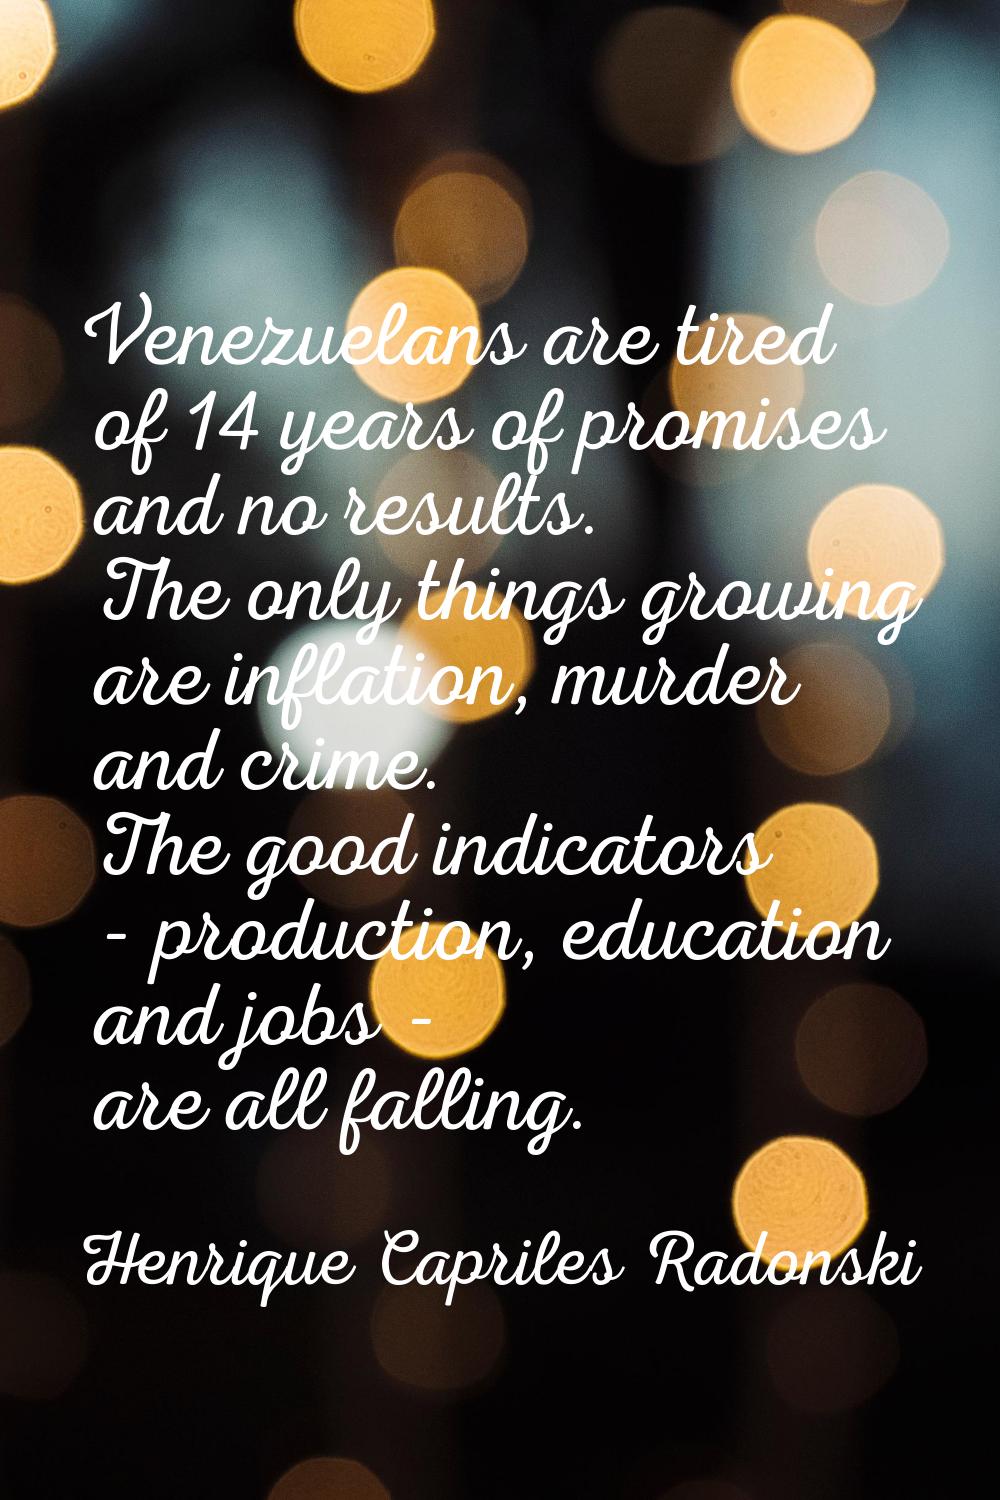 Venezuelans are tired of 14 years of promises and no results. The only things growing are inflation